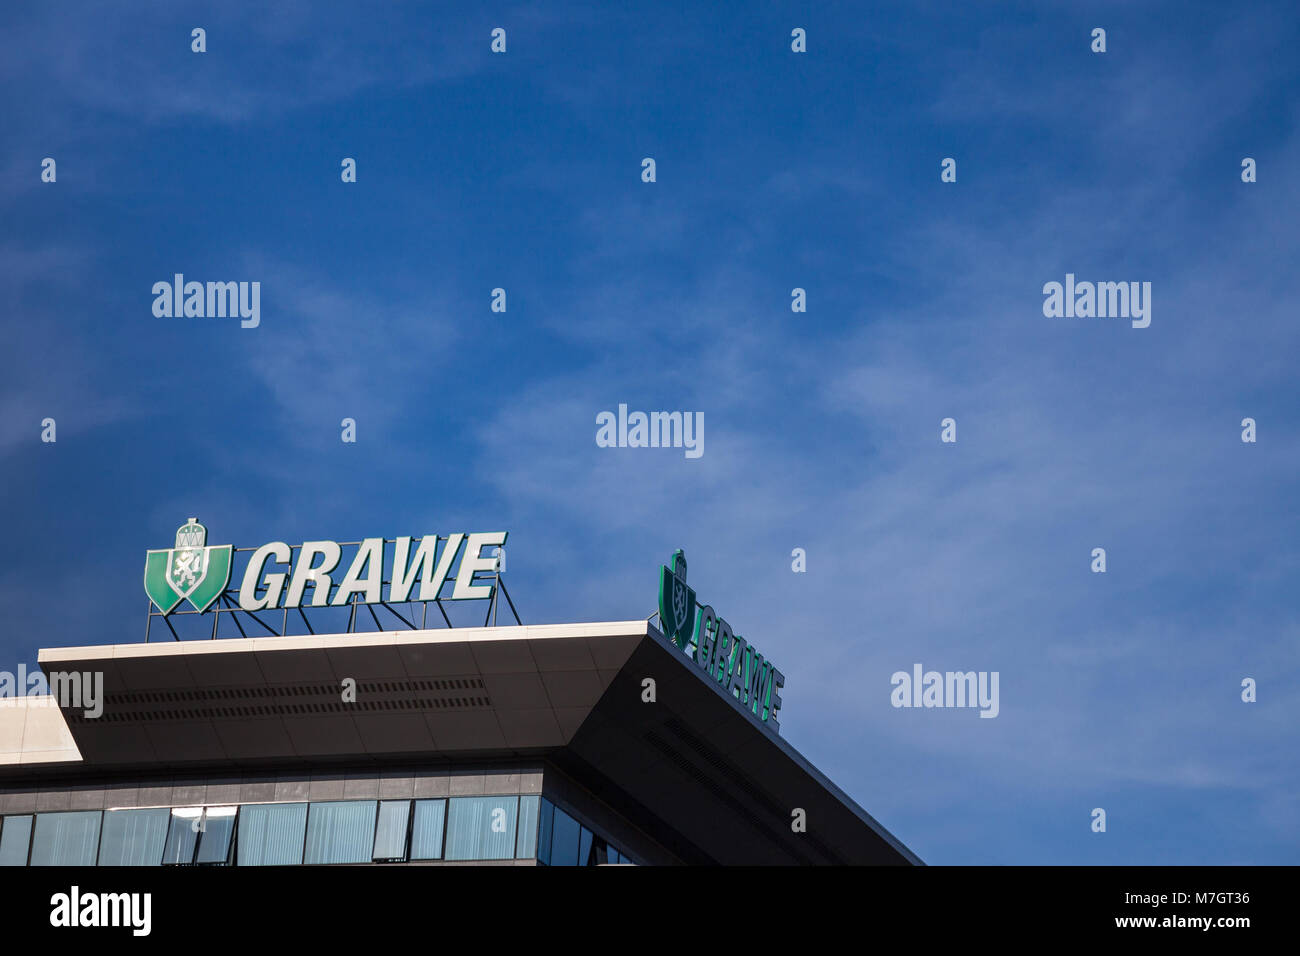 BELGRADE, SERBIA - MARCH 9, 2018: Grawe logo on their main office for Serbia. Grawe, or Grazer Wechselseitige  is one of the biggest Austrian insuranc Stock Photo